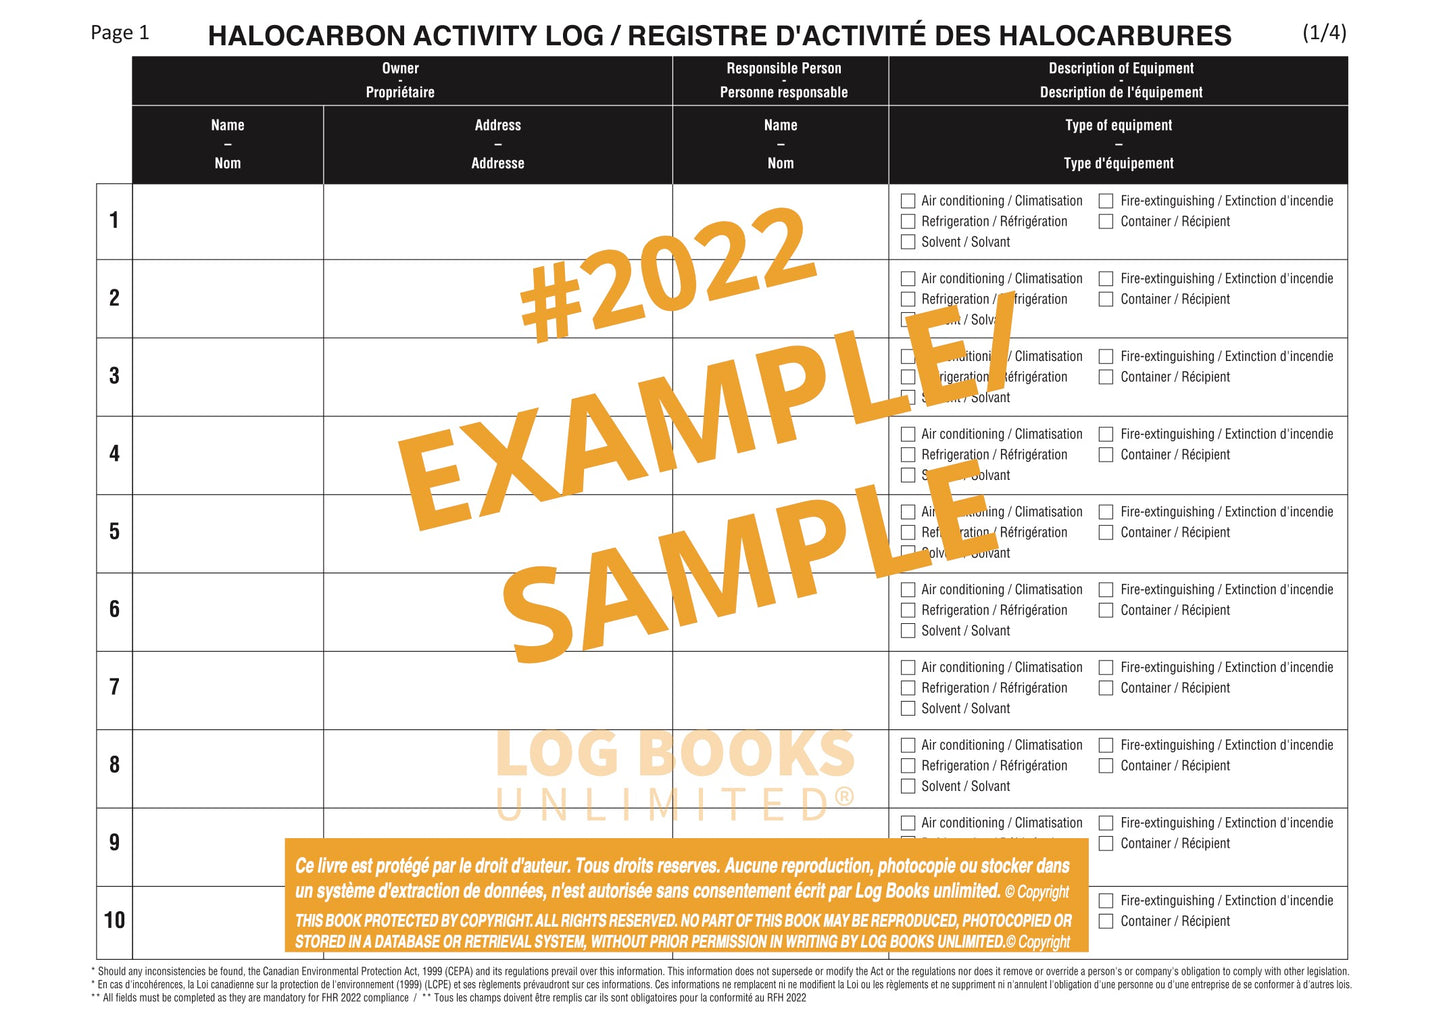 an example of halocarbon activity log book